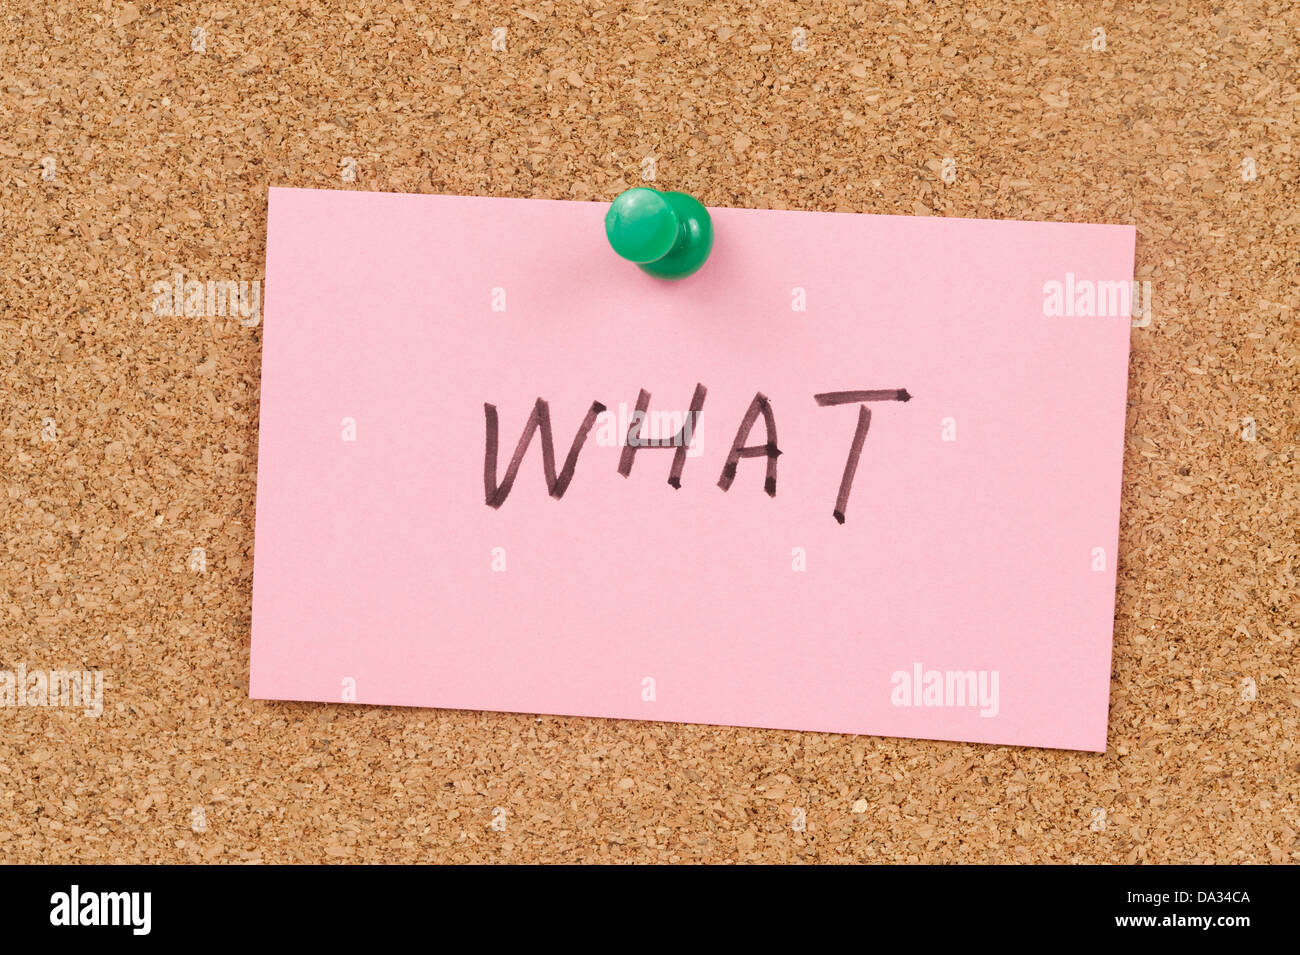 What word written on paper and pinned on cork board Stock Photo